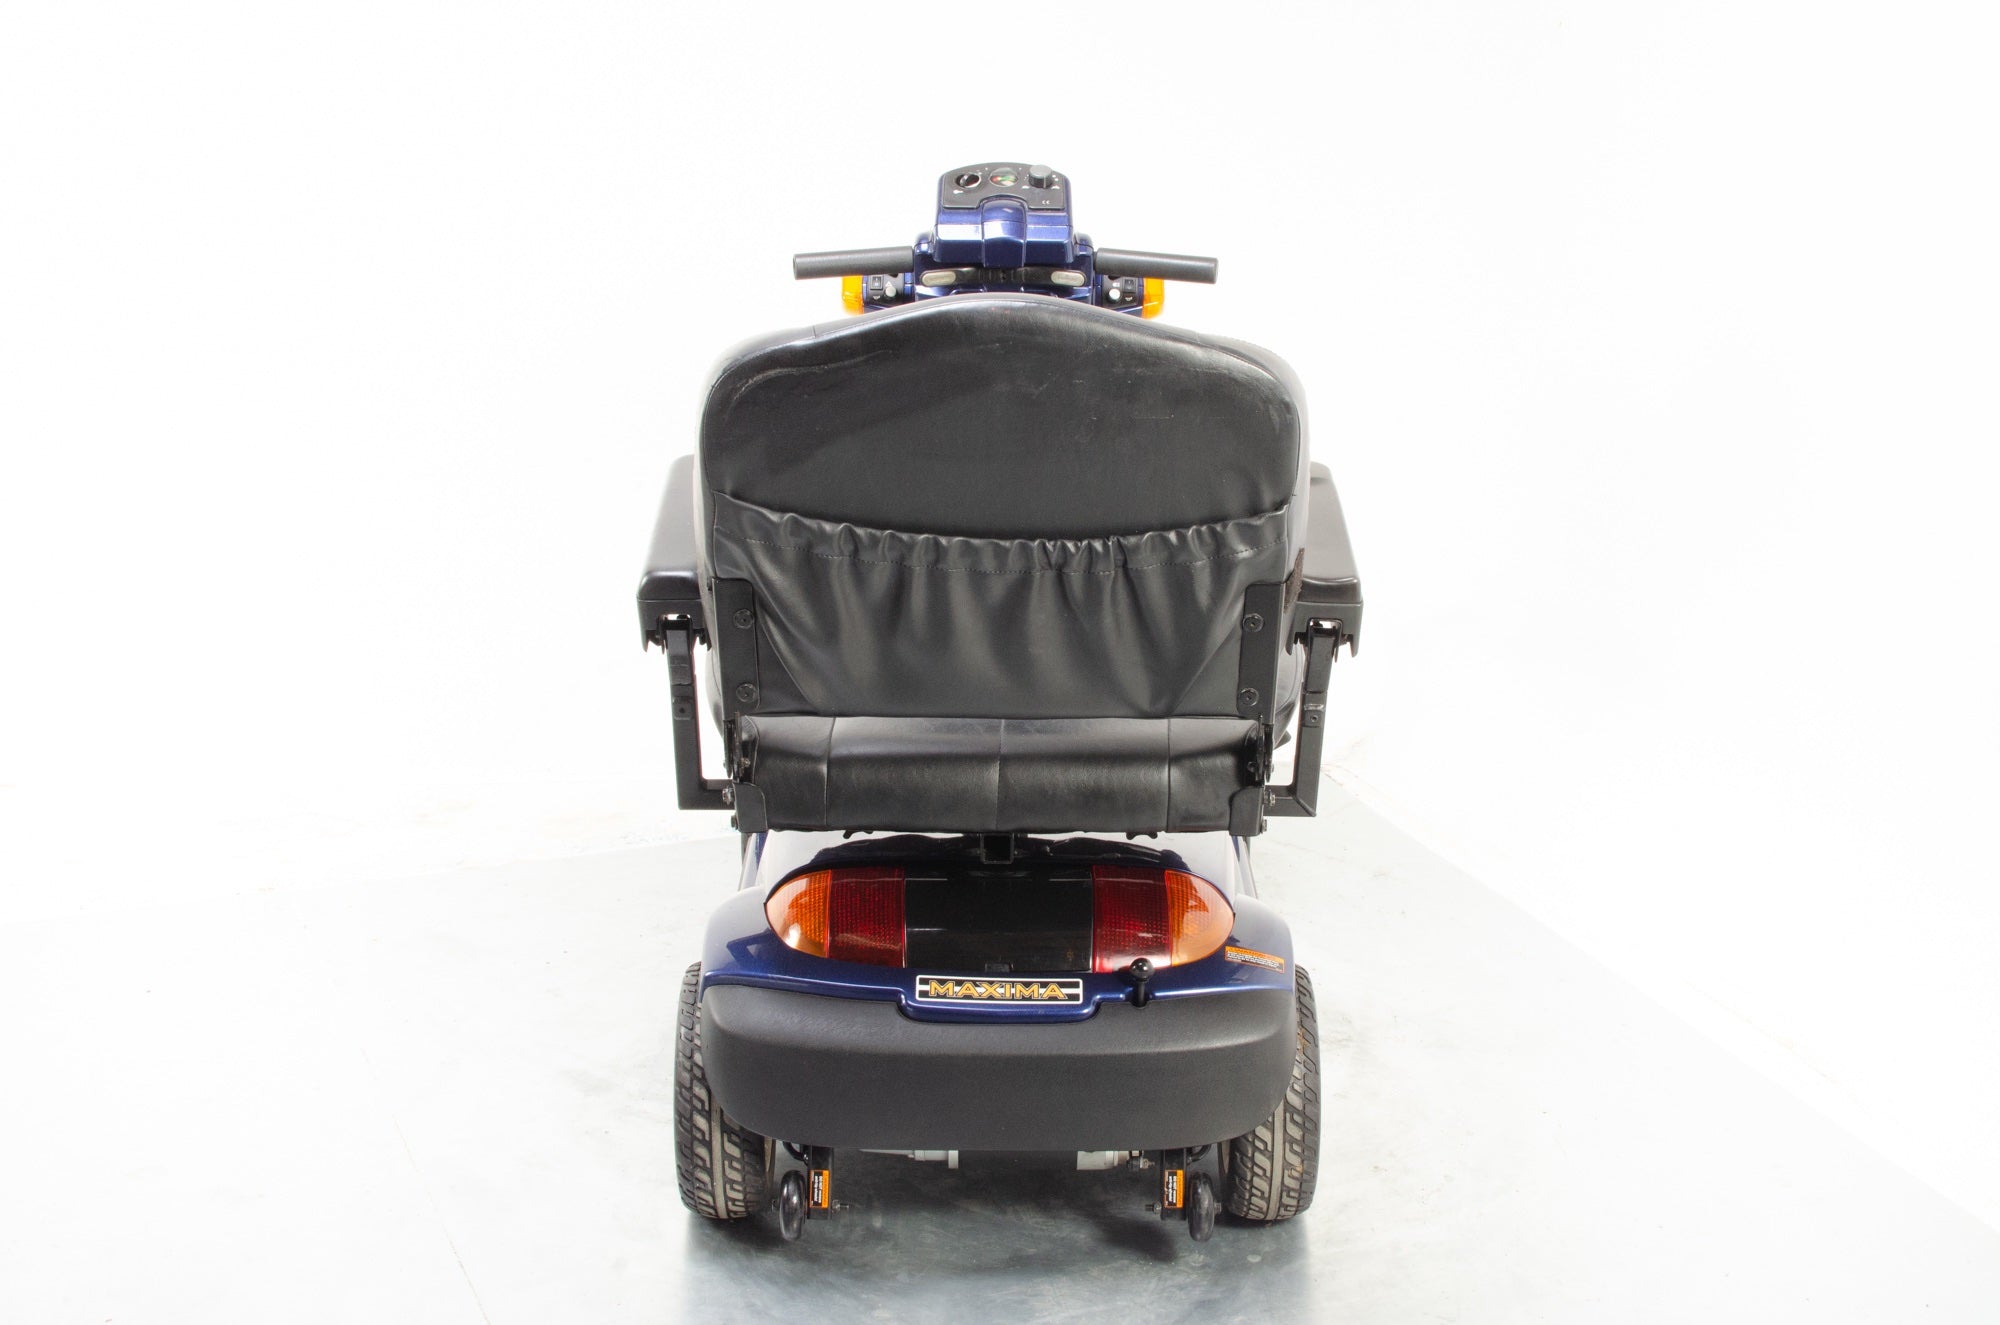 Pride Maxima Used Electric Mobility Scooter Bariatric Heavy Duty Pavement